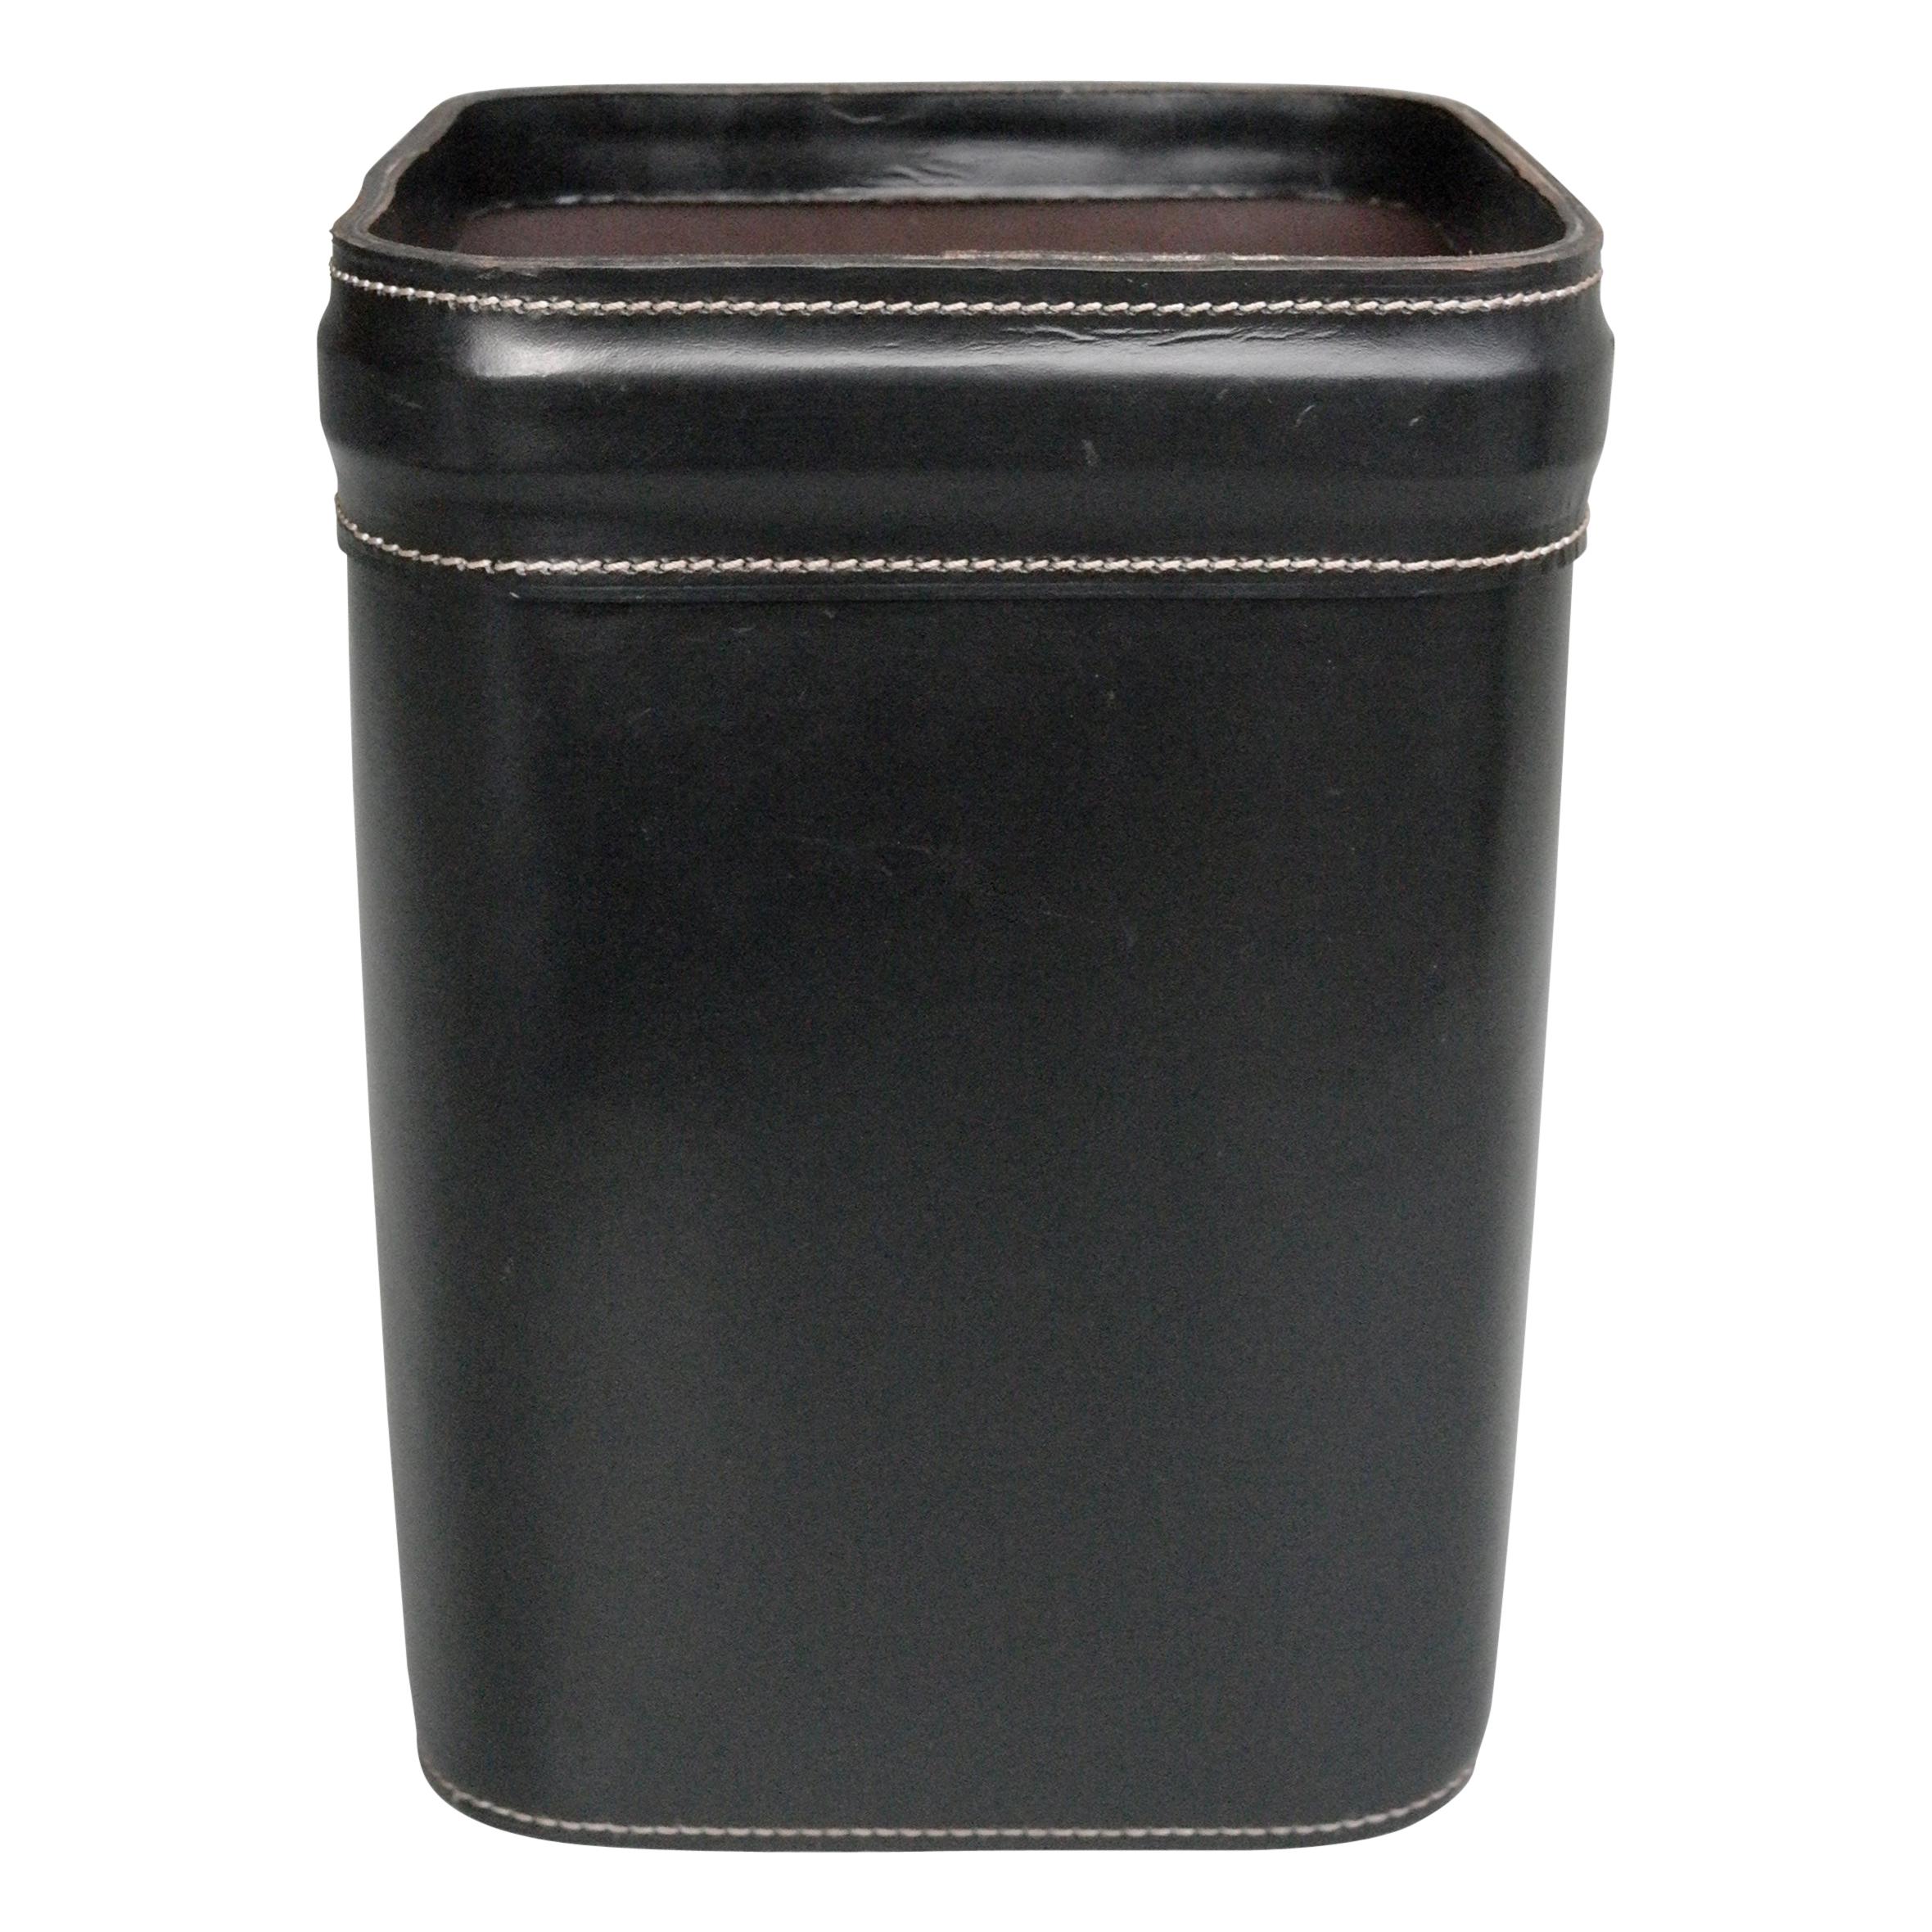 French Hand Stitched Black Leather Waste Paper Basket